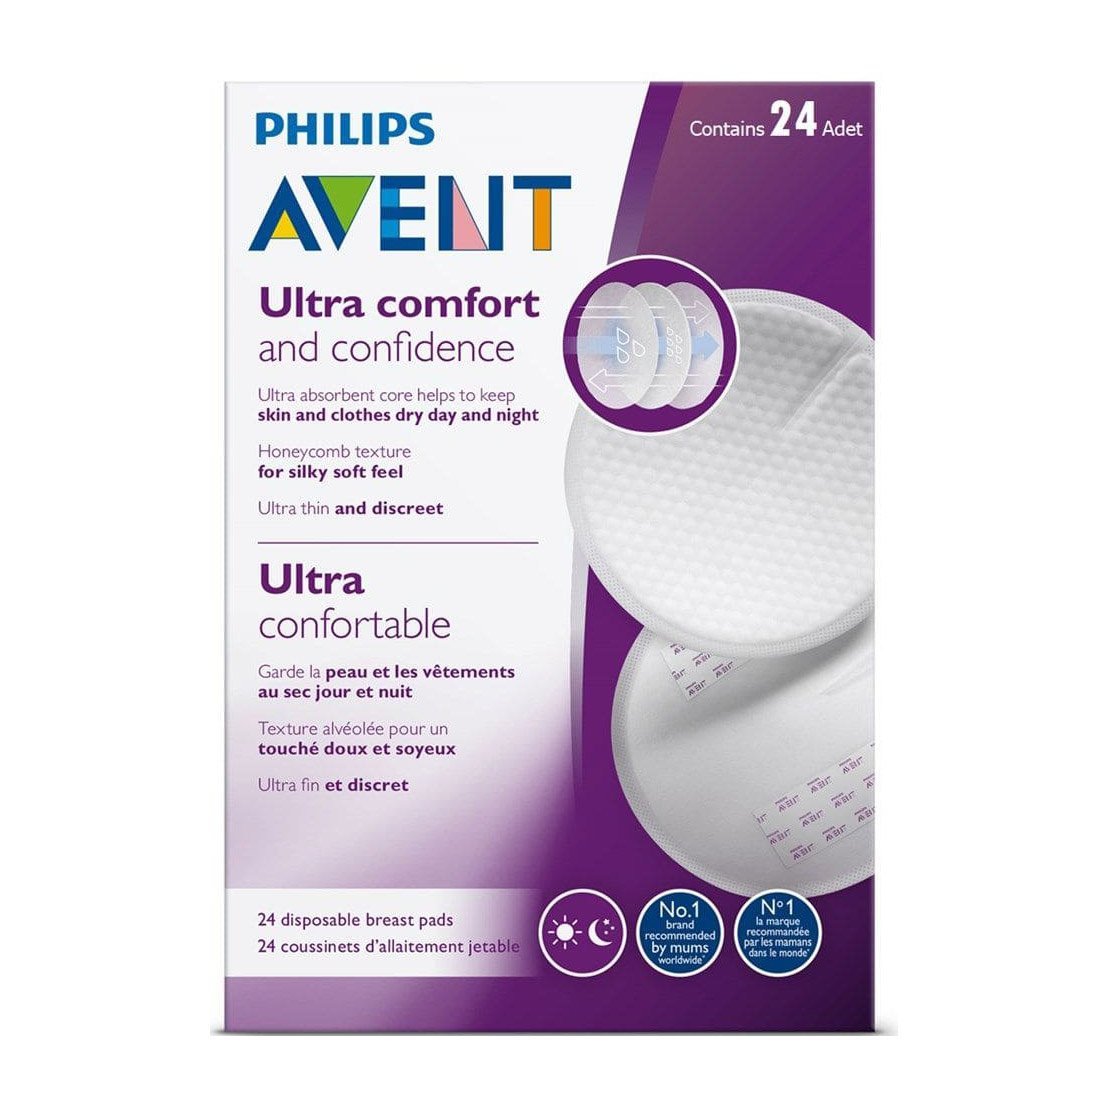 Avent Ultra Comfort and Confidence Breast Pads - 24psc - Bloom Pharmacy